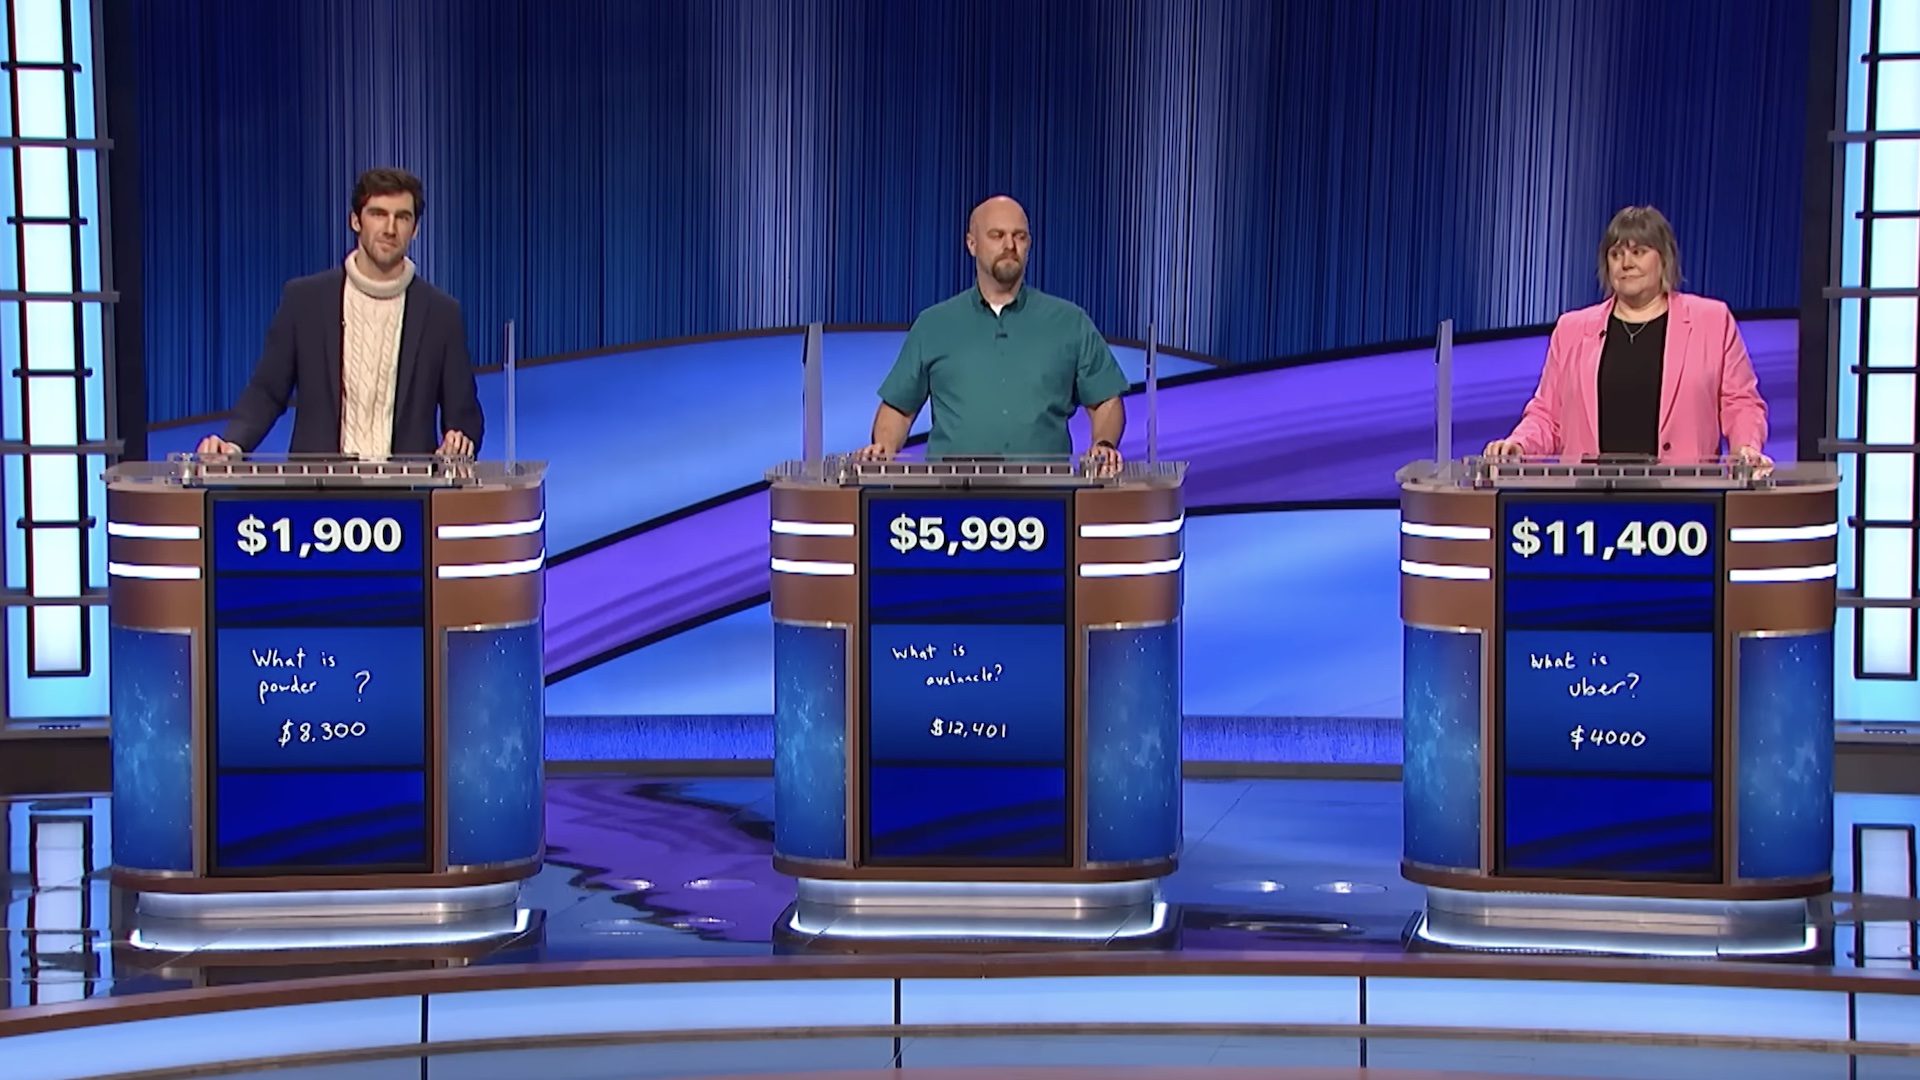 The metaverse cost these Jeopardy contestants dearly